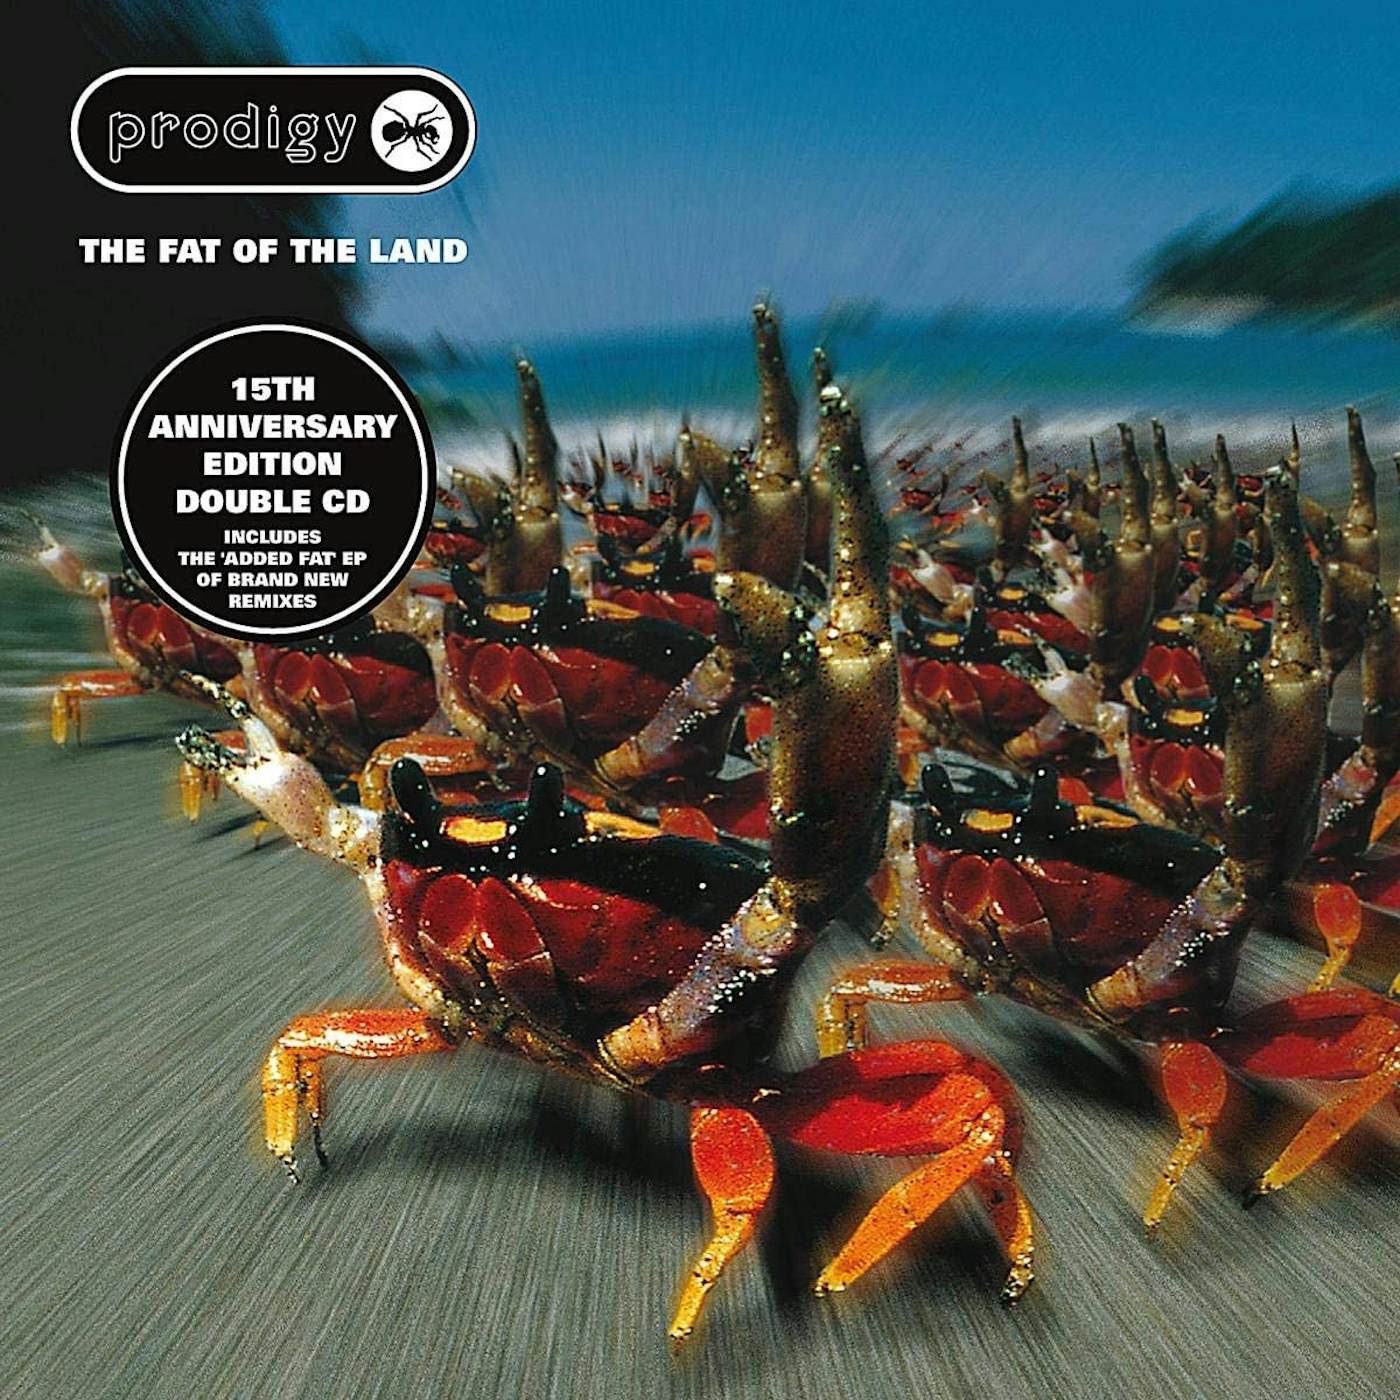 The Prodigy - Fat of the Land 2CD